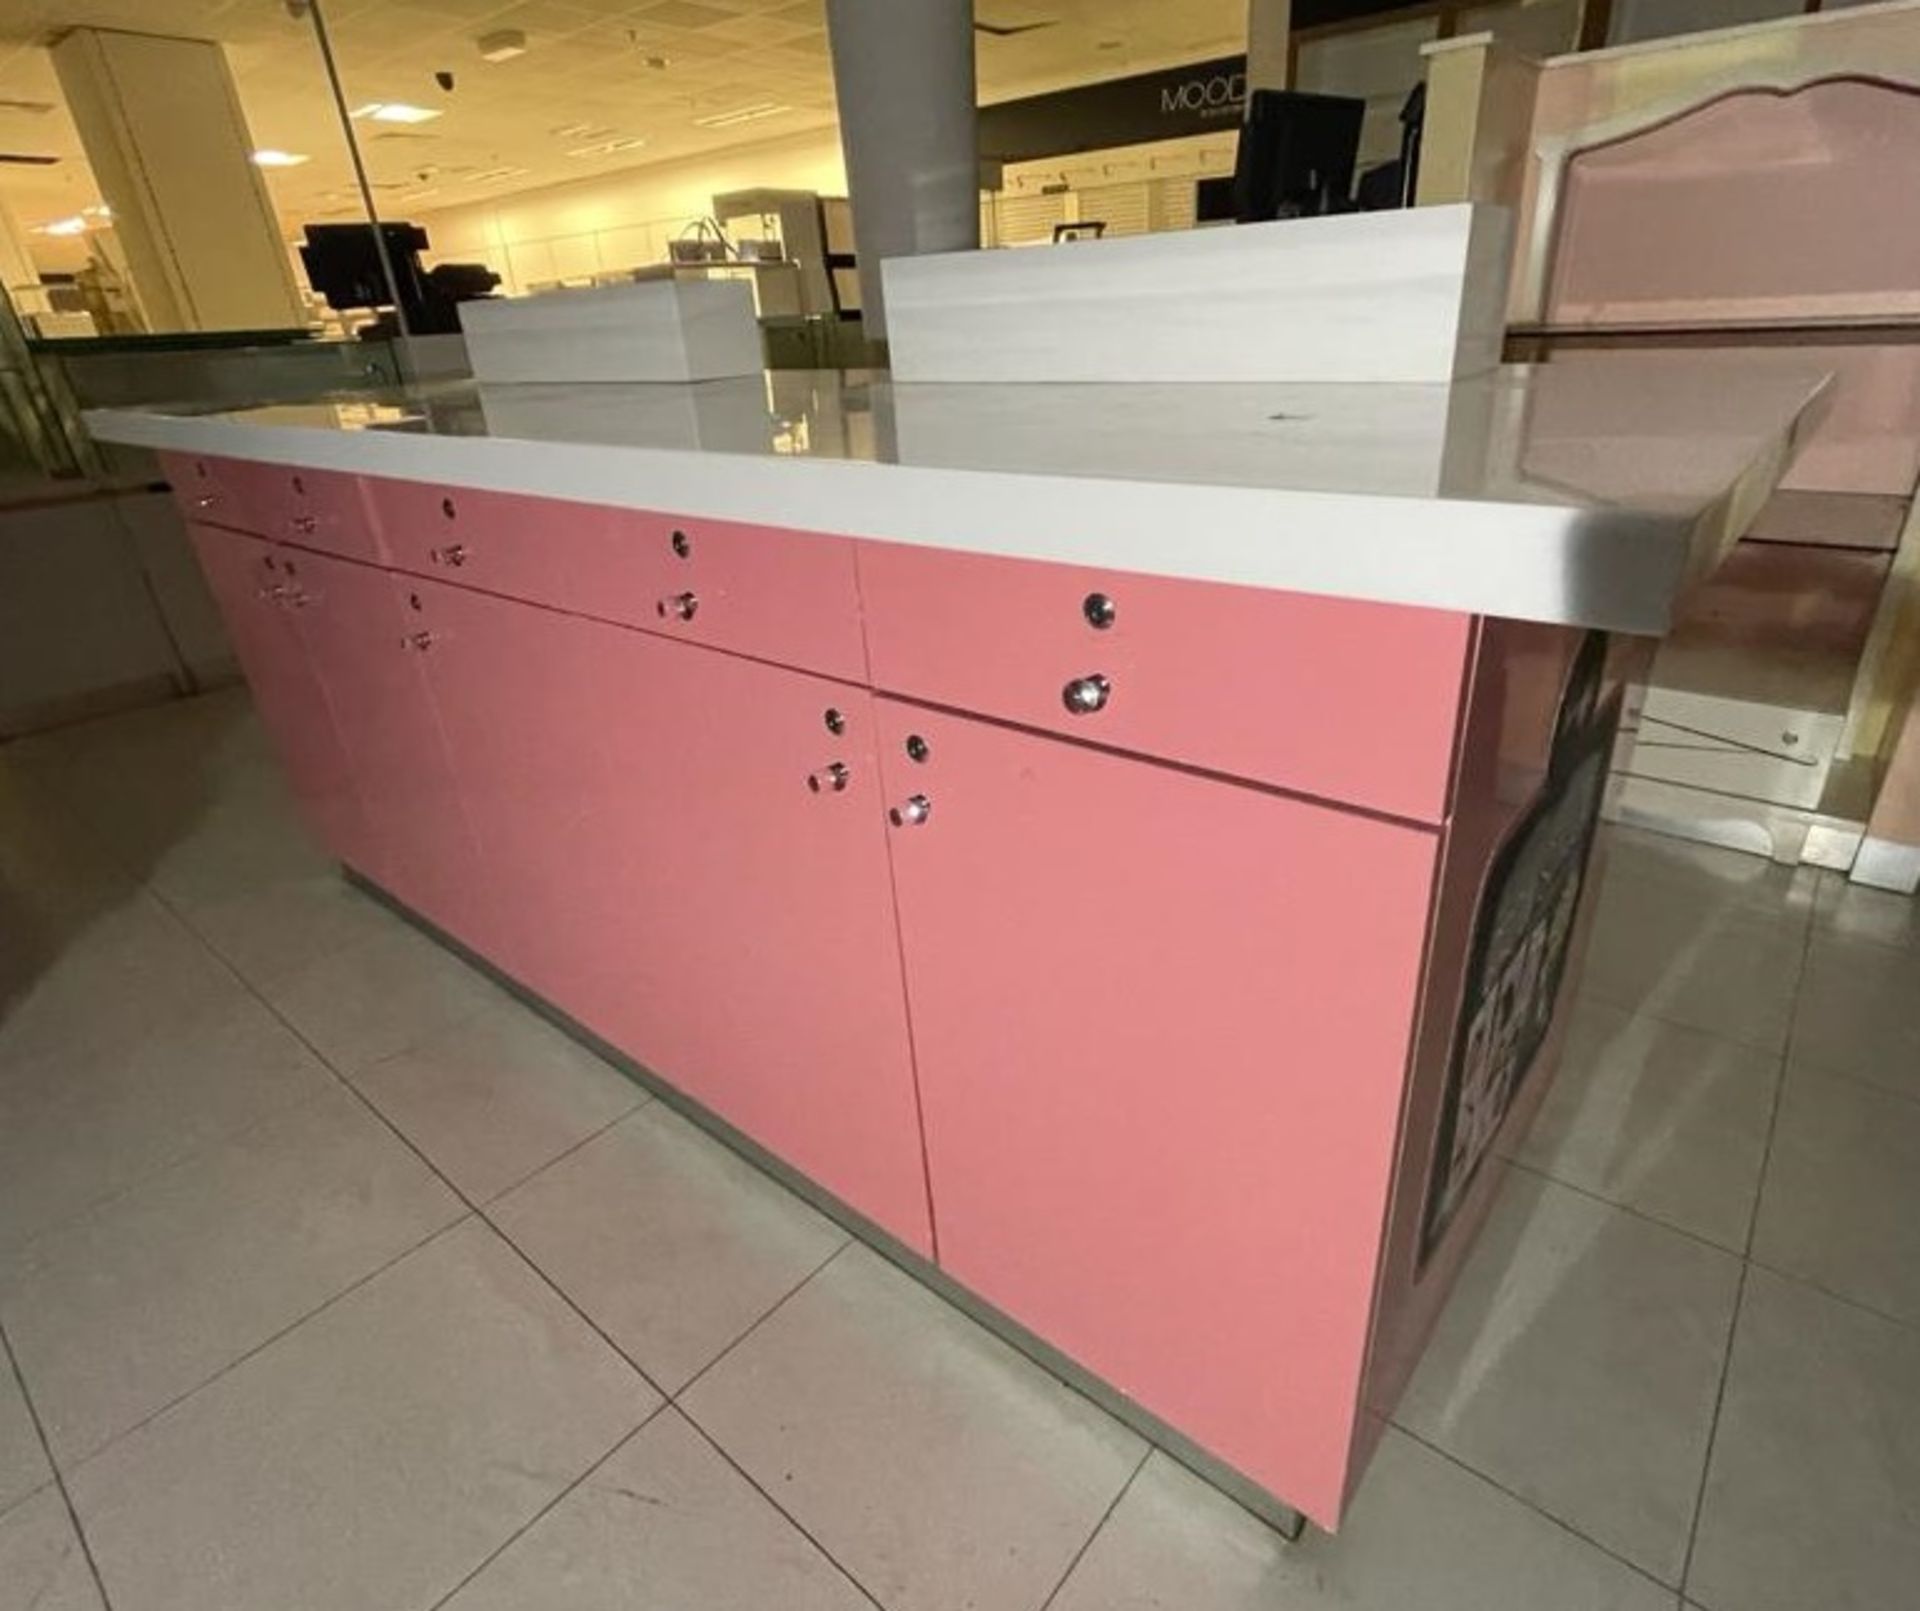 1 x Benefit Retail Testing Counter With Corian Worktop, Sample Holders and Bin Chute - Features Lots - Image 16 of 19